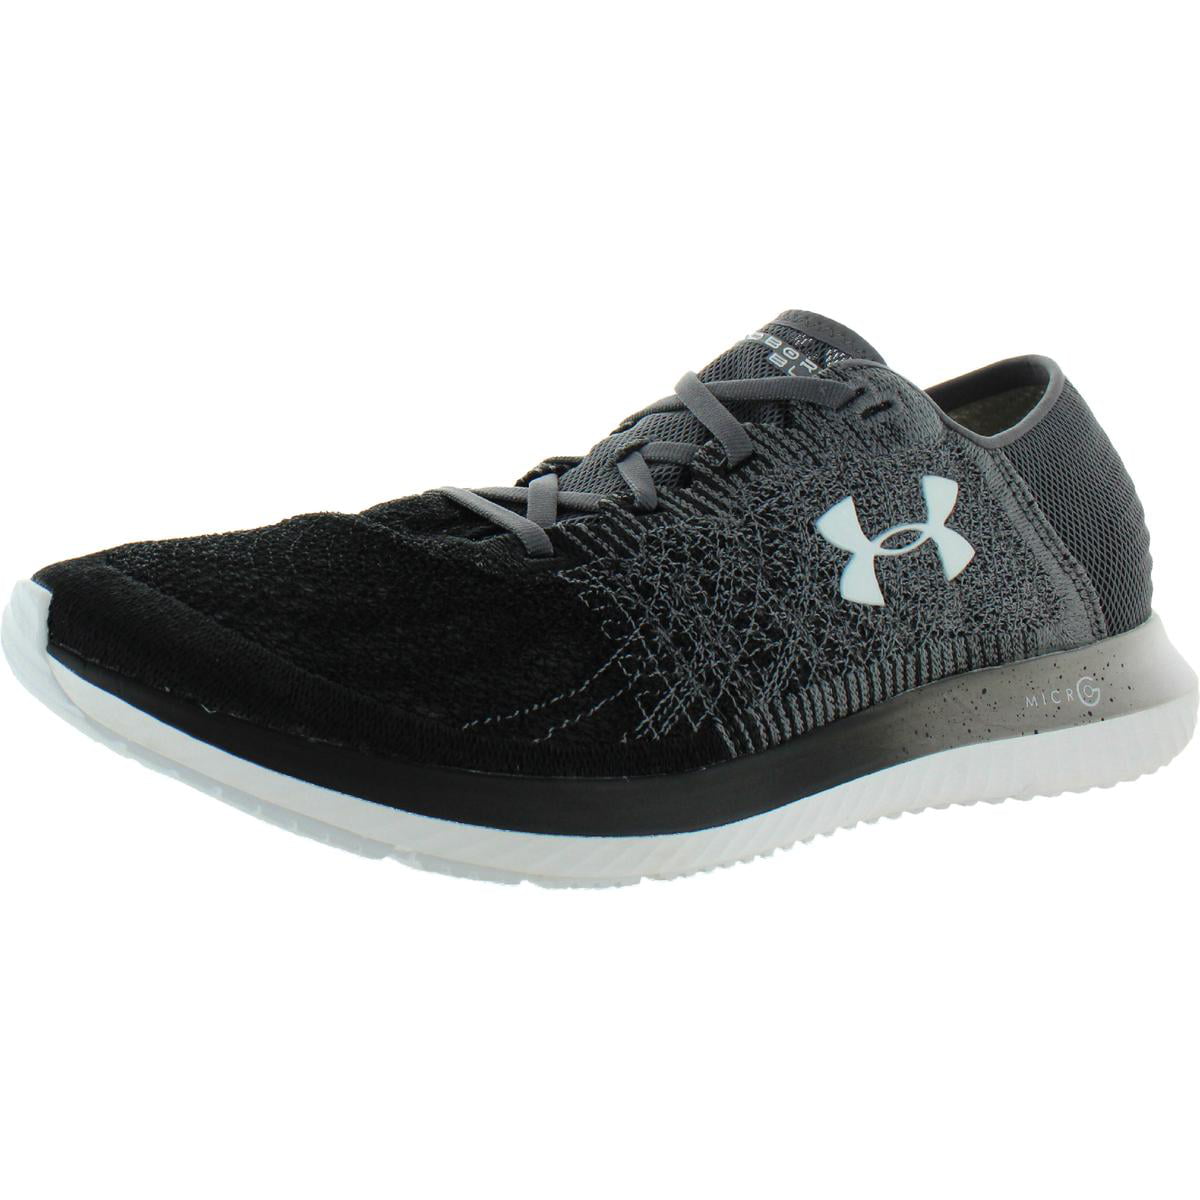 Under Armour Mens Threadborne Blur Running Shoes Trainers Sneakers Grey Sports 